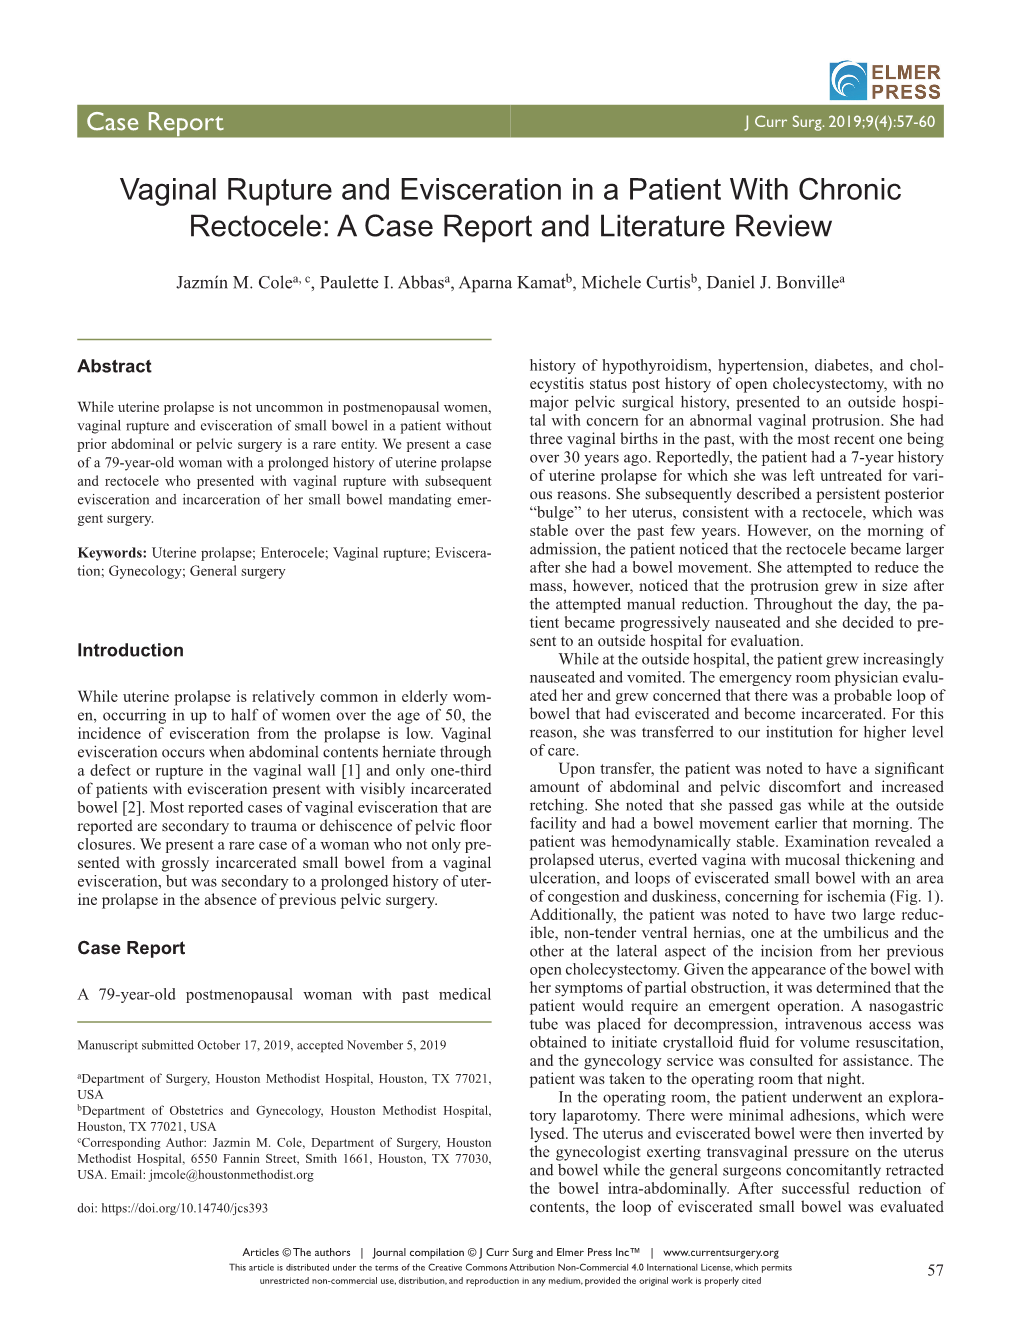 Vaginal Rupture and Evisceration in a Patient with Chronic Rectocele: a Case Report and Literature Review